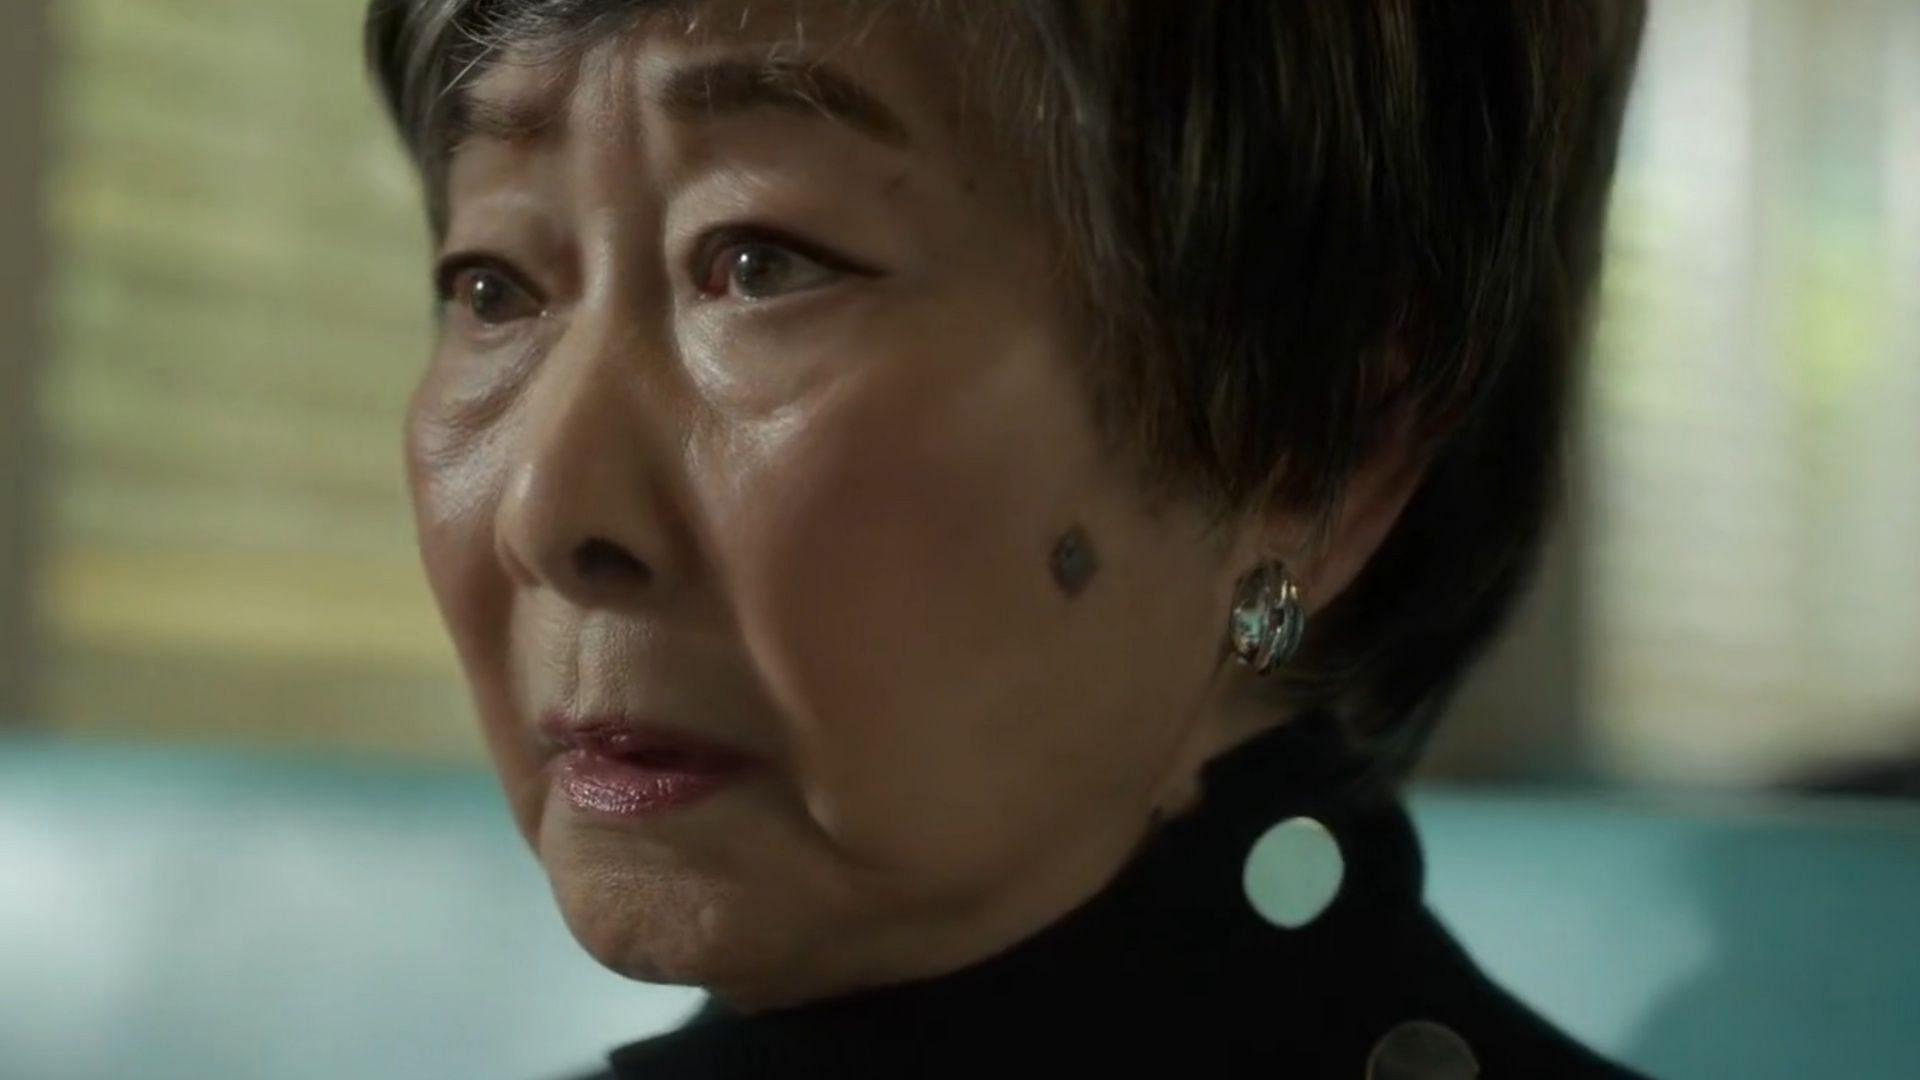 Cecilia Chun, as seen in Death and Other Details episode 7 (Image via Hulu)